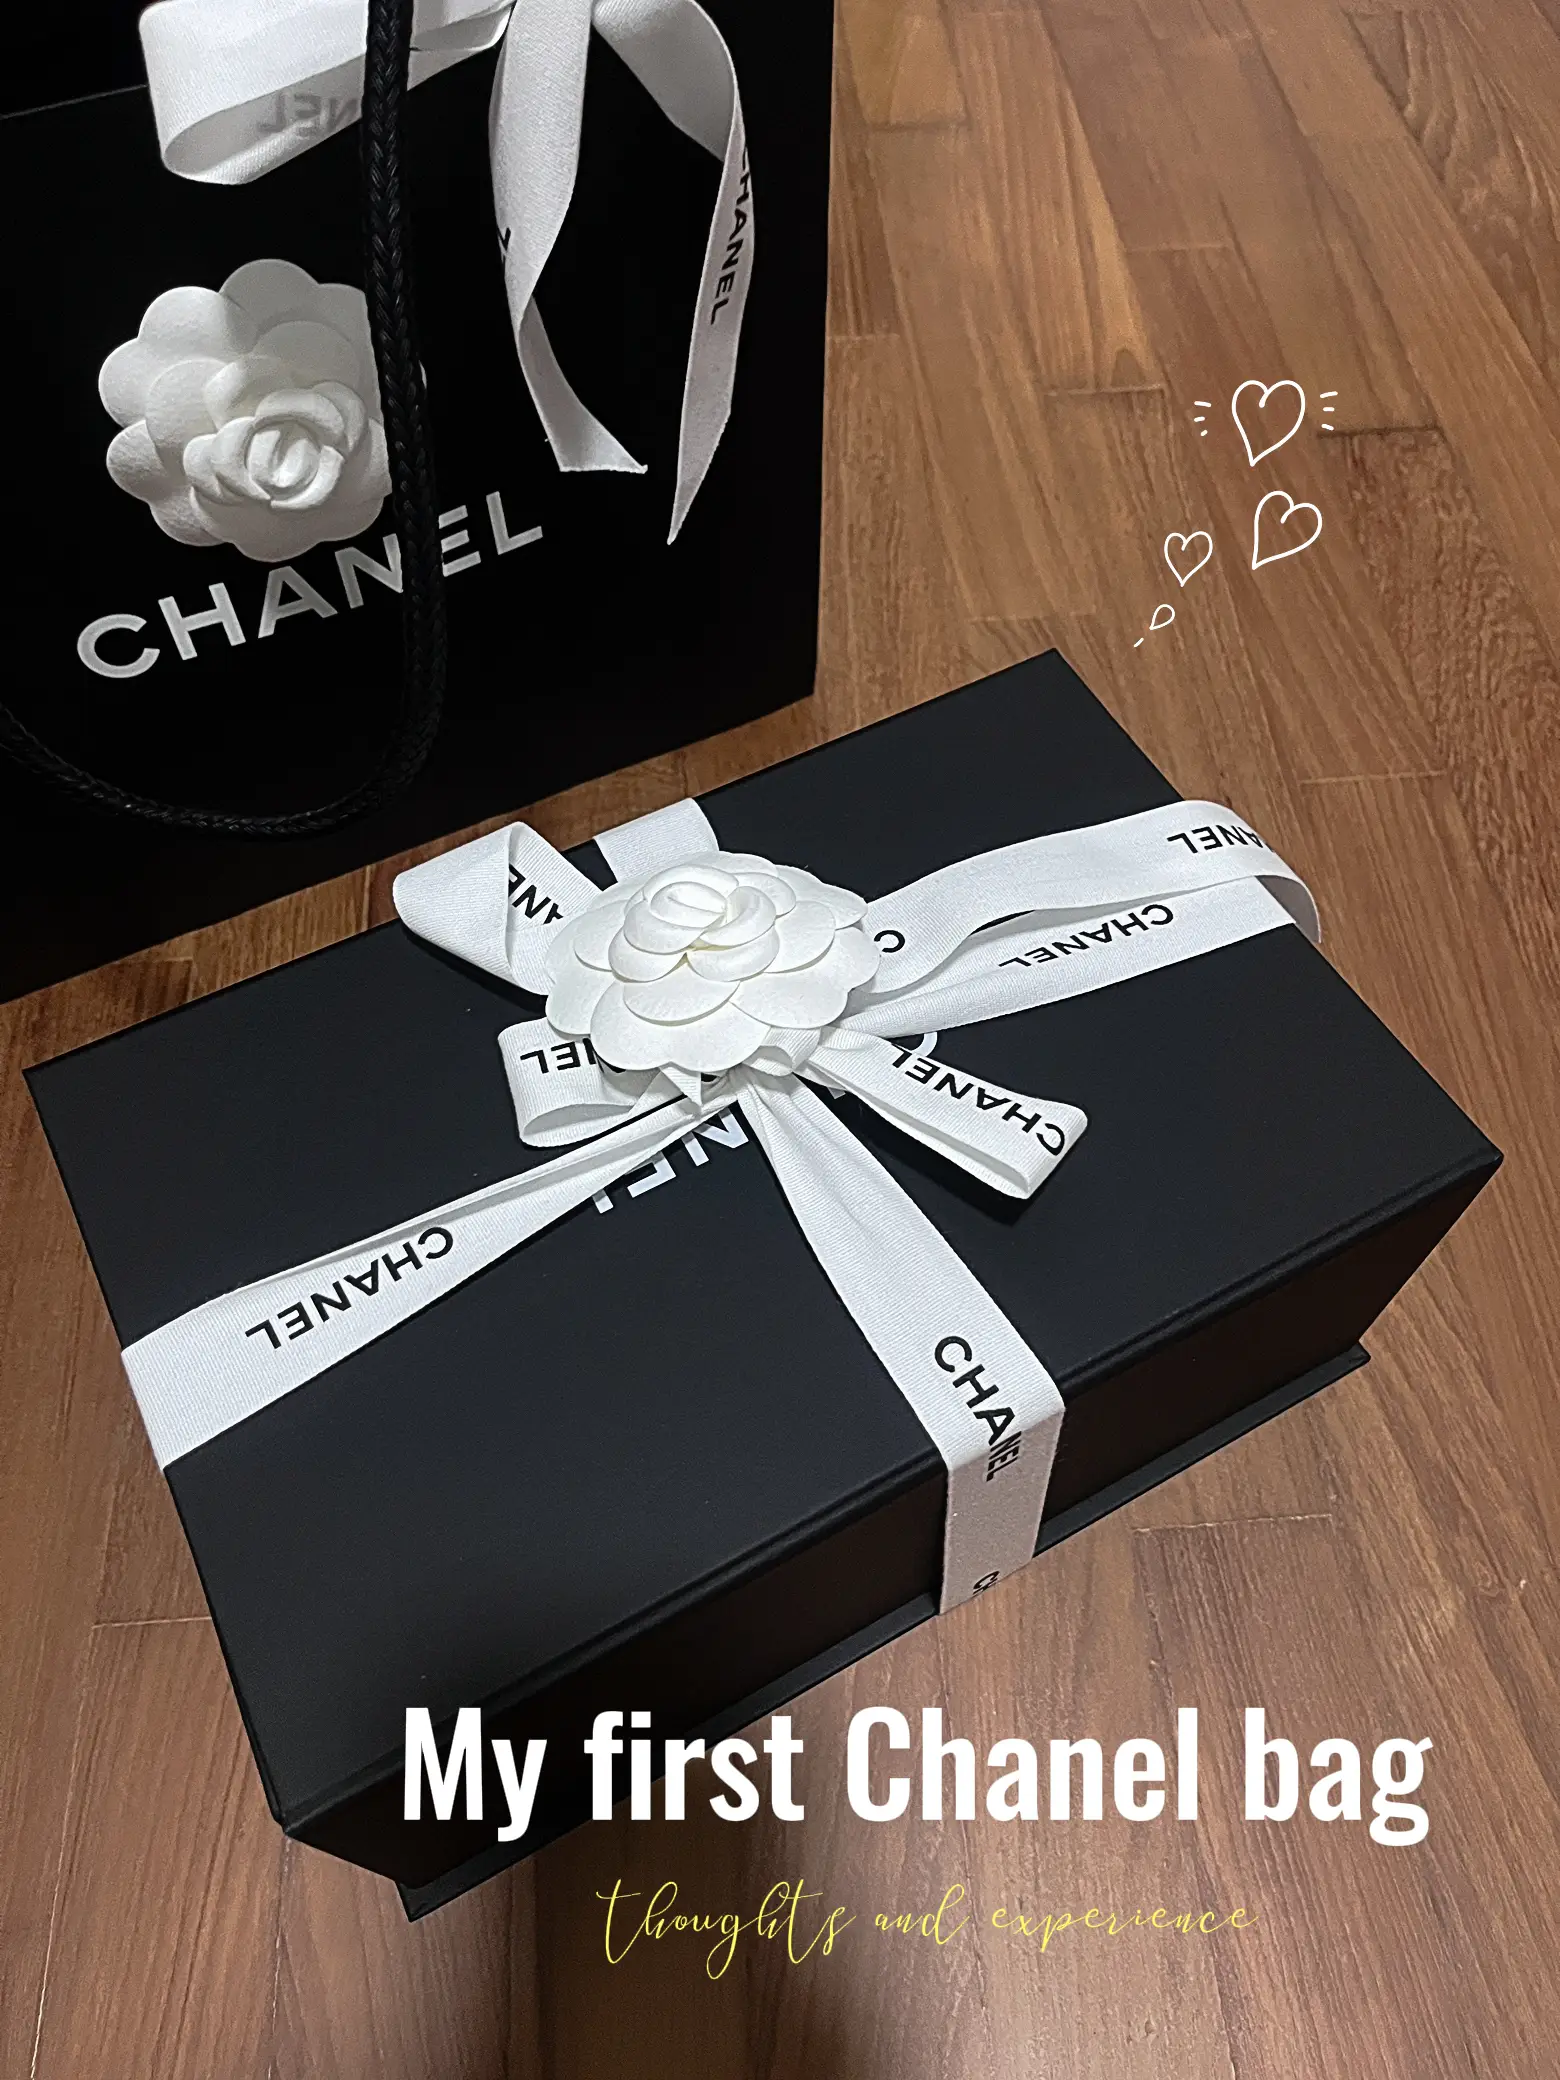 I got a Chanel bag this birthday 🤩, Gallery posted by Rachella